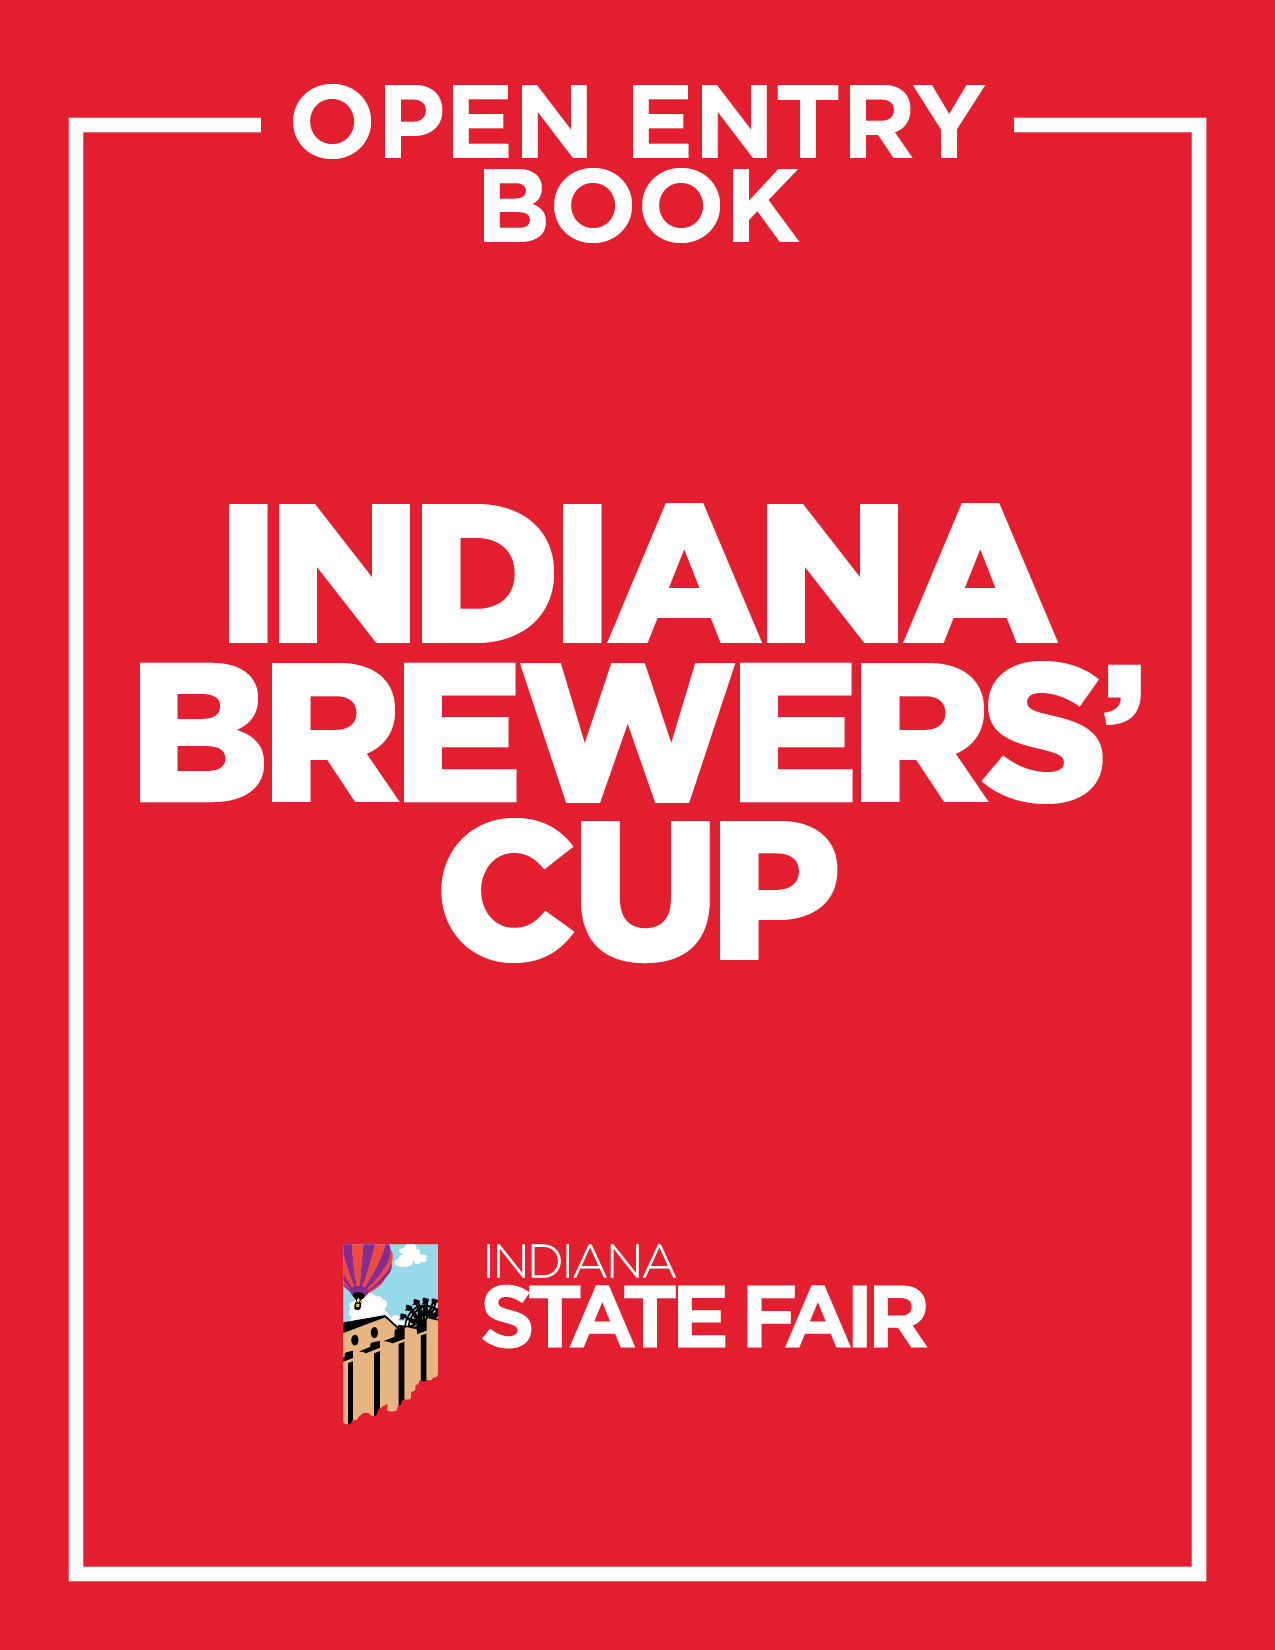 Indiana Brewers' Cup Indiana State Fair